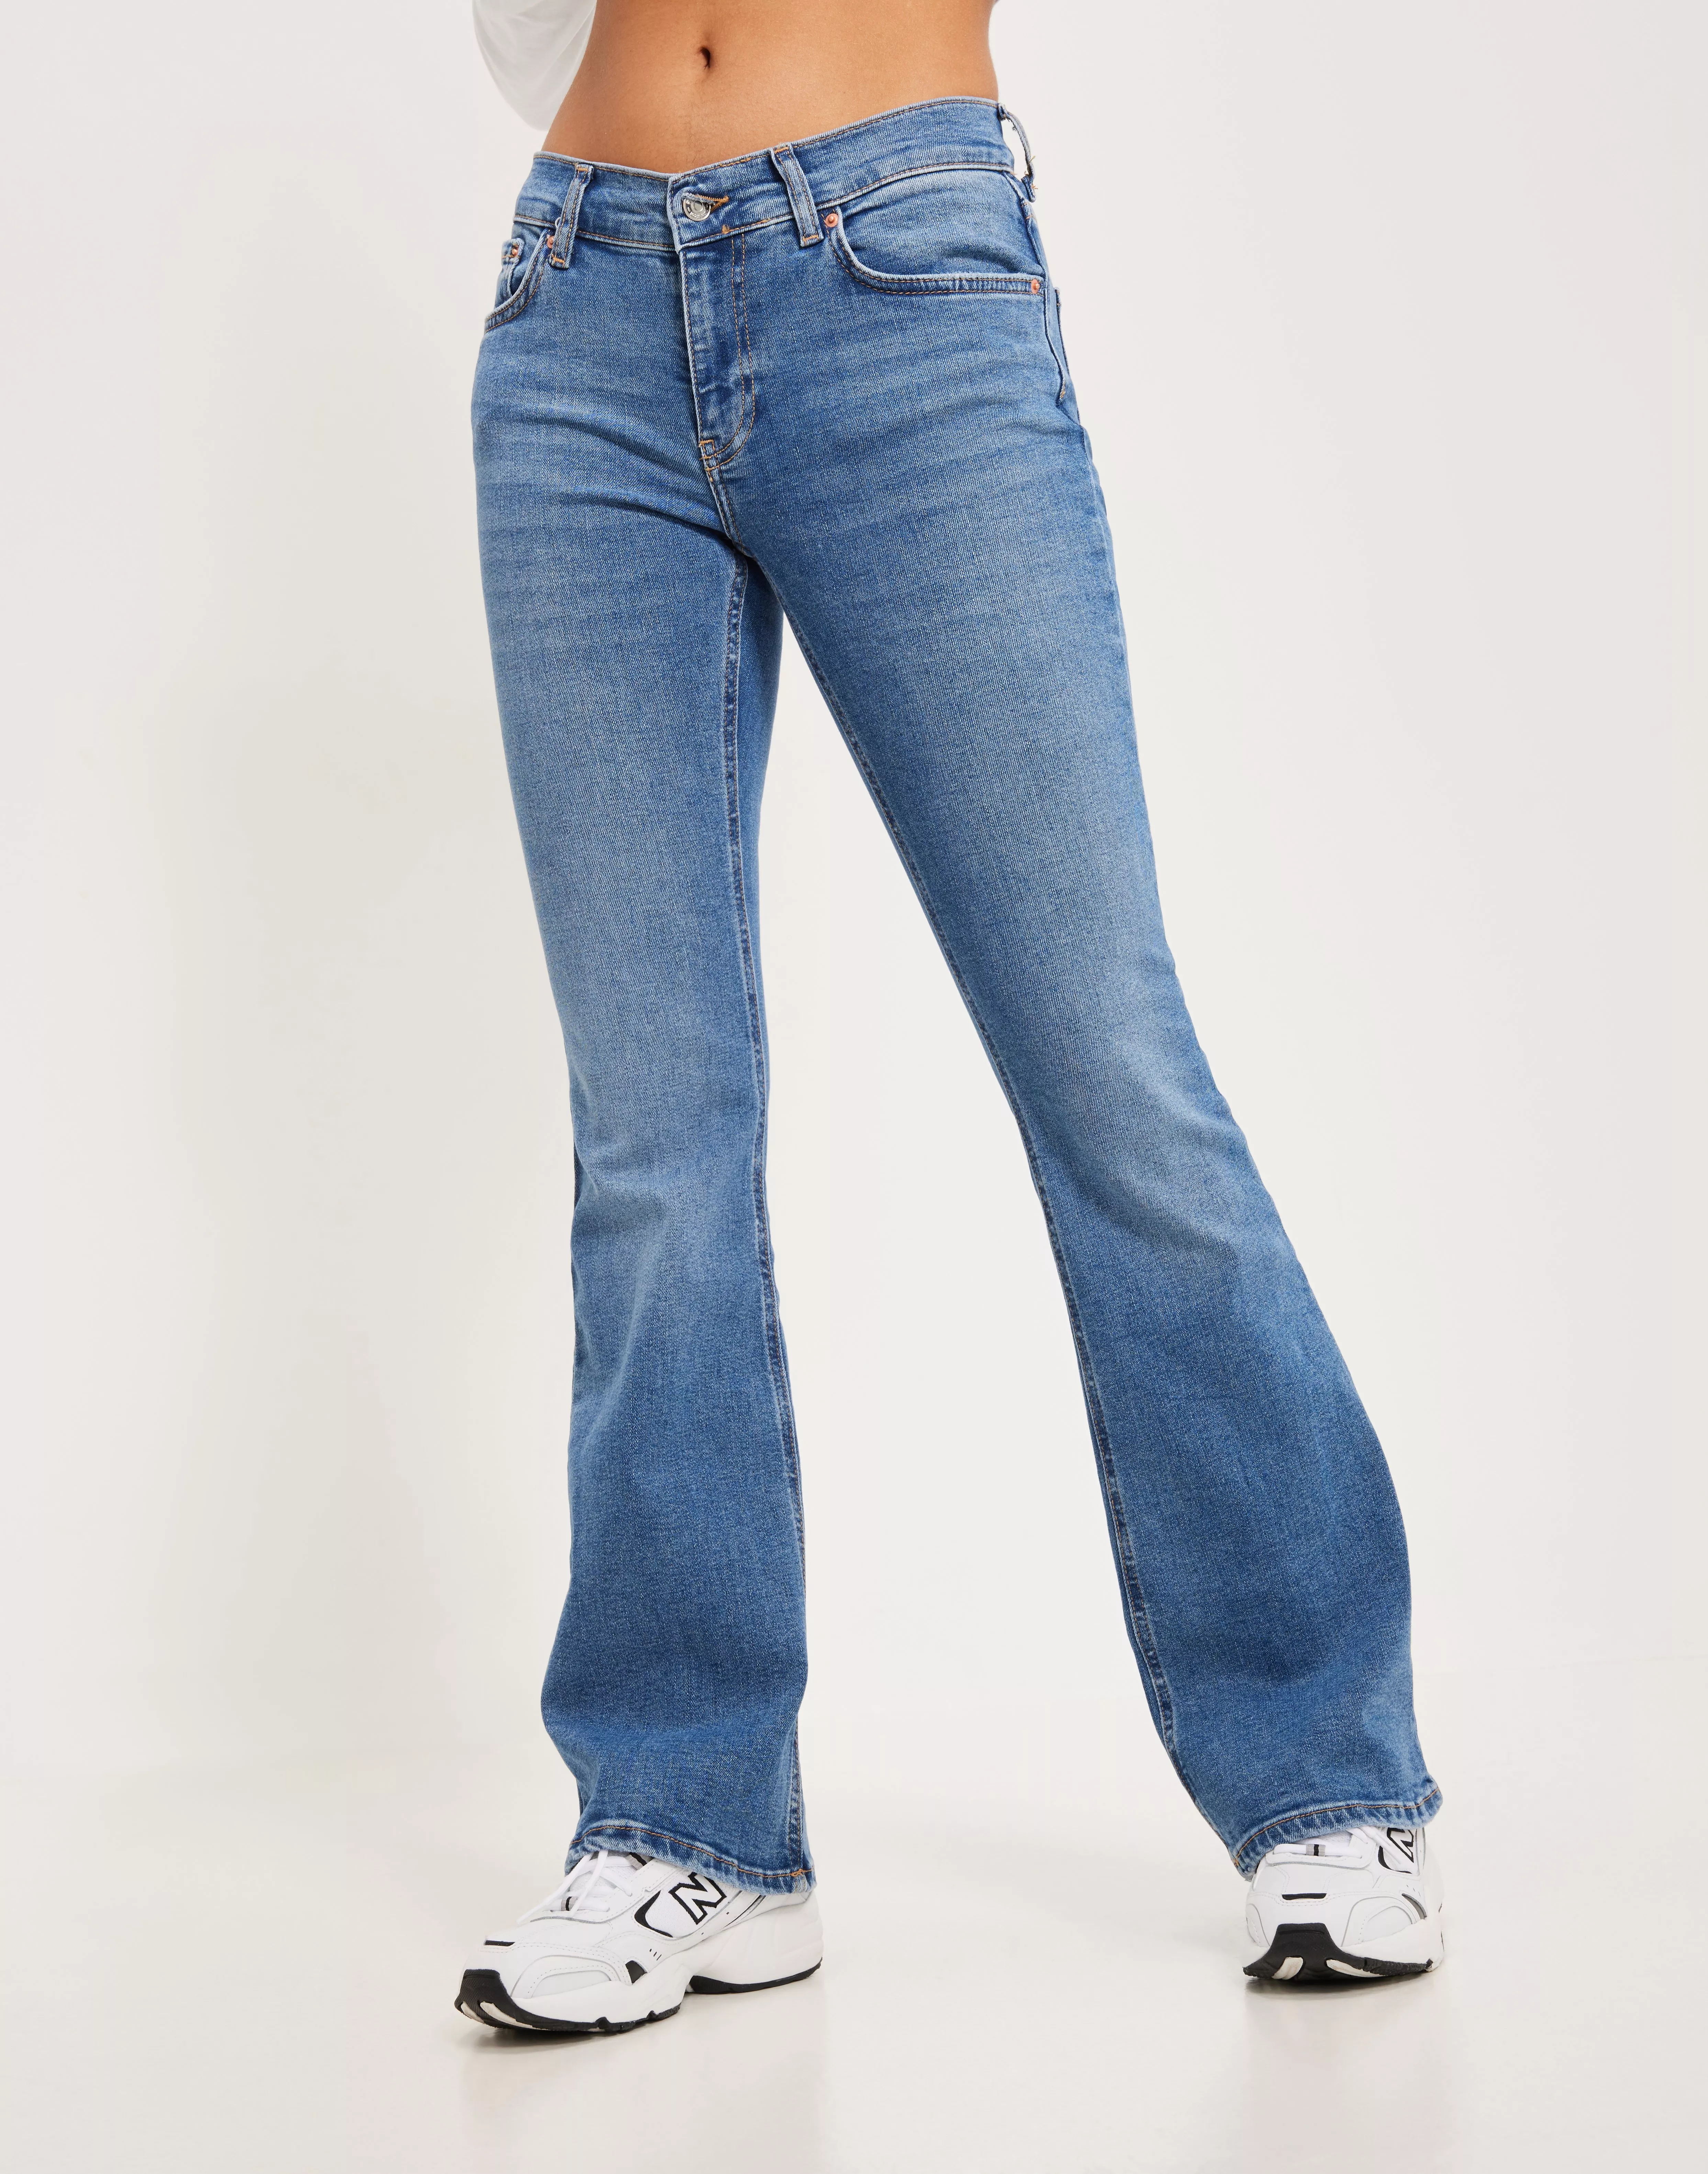 Buy Gina Tricot Low waist bootcut jeans - Ocean Blue